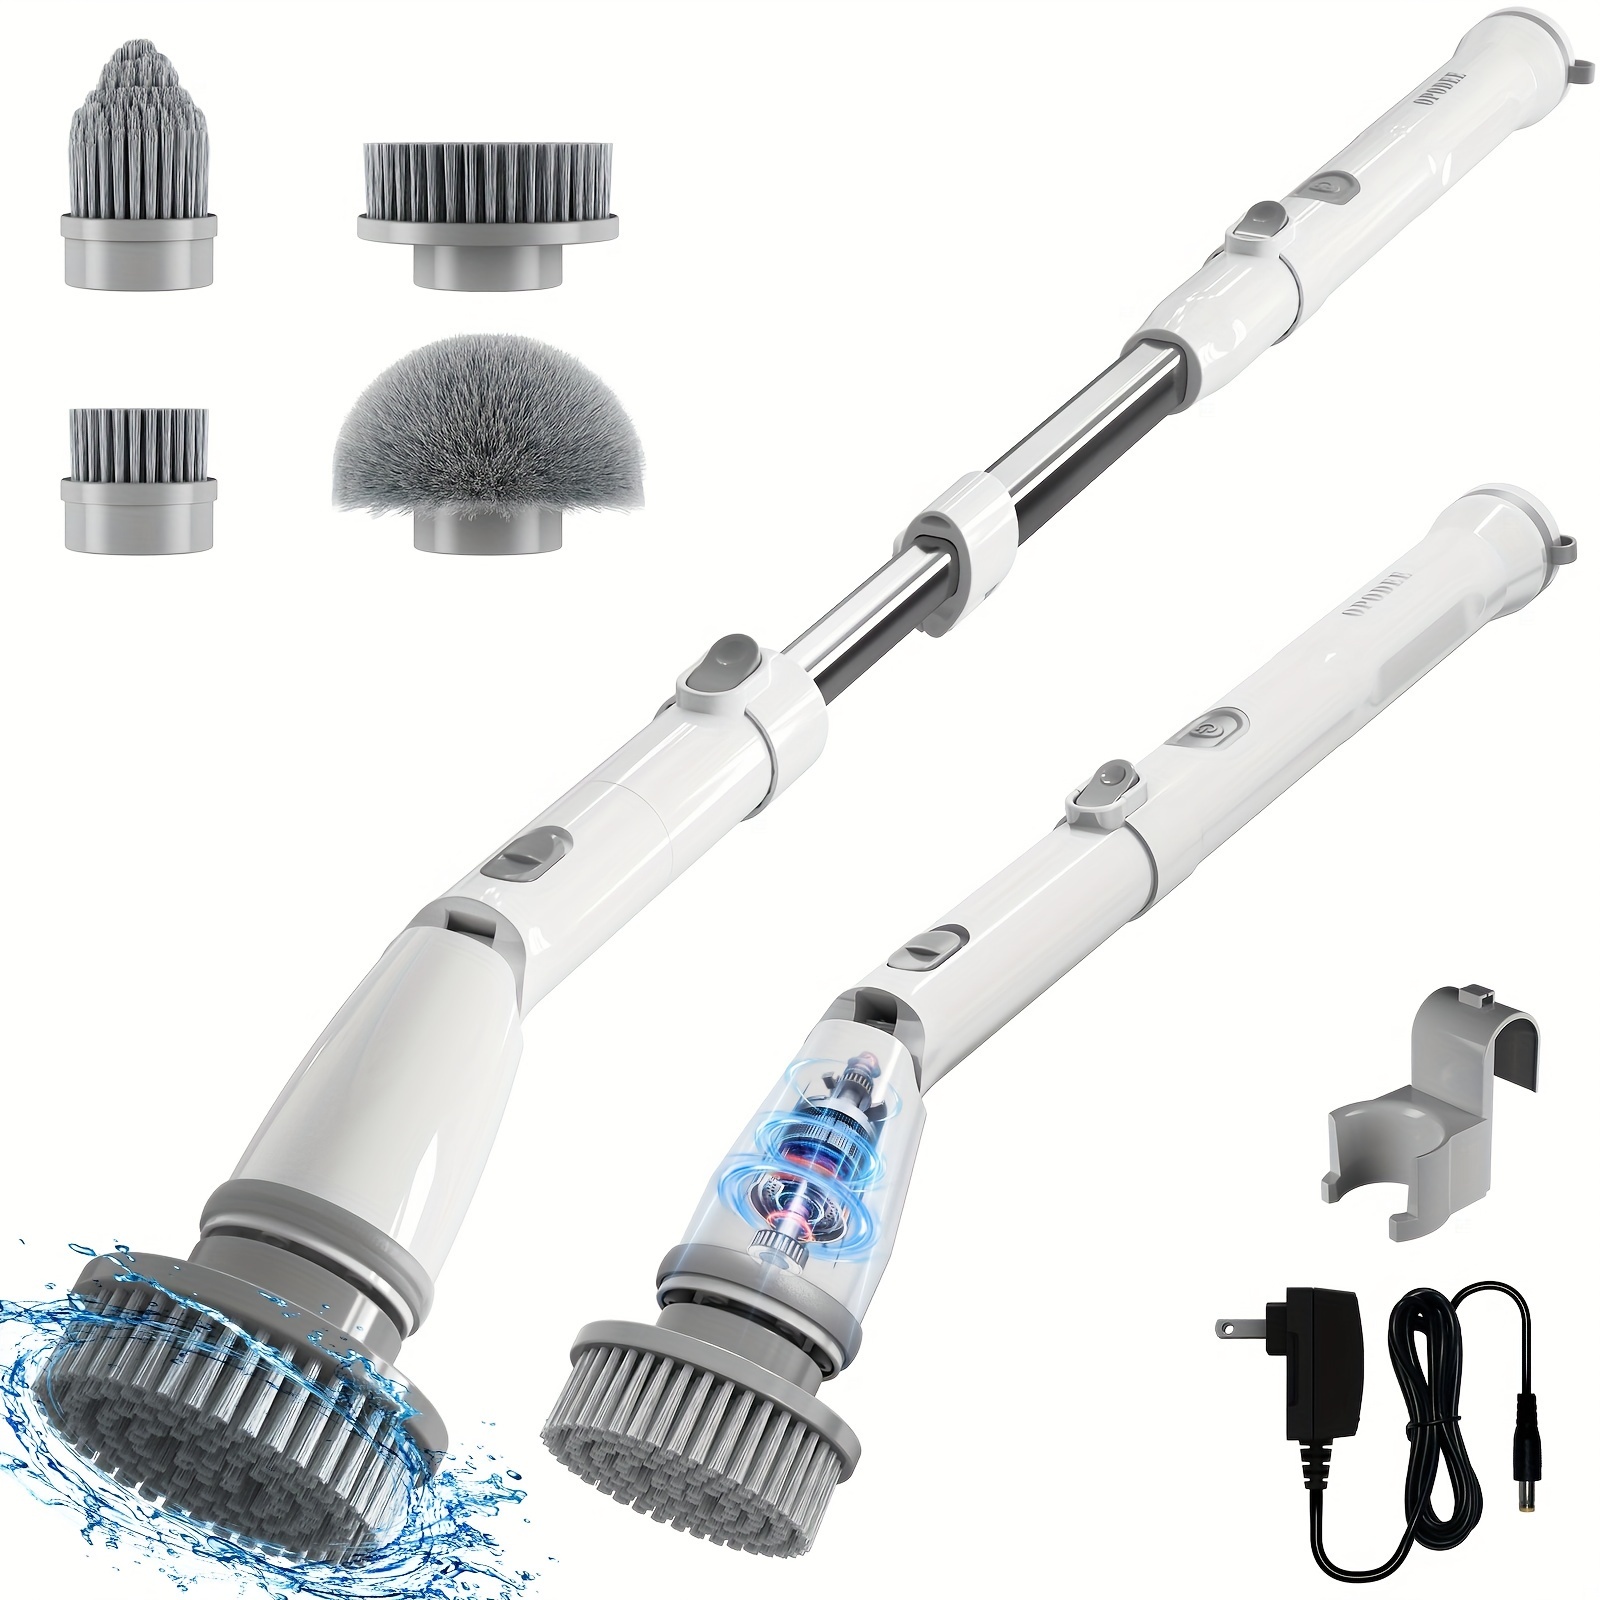 

Electric Spin Scrubber, Shower Scrubber With Long Handle, Adjustable Extension Arm, 4 Replaceable Heads, 3 Angles, 2 Rotating Speeds, Spin Brush For Shop Cleaning Bathroom Tile Tub Floor